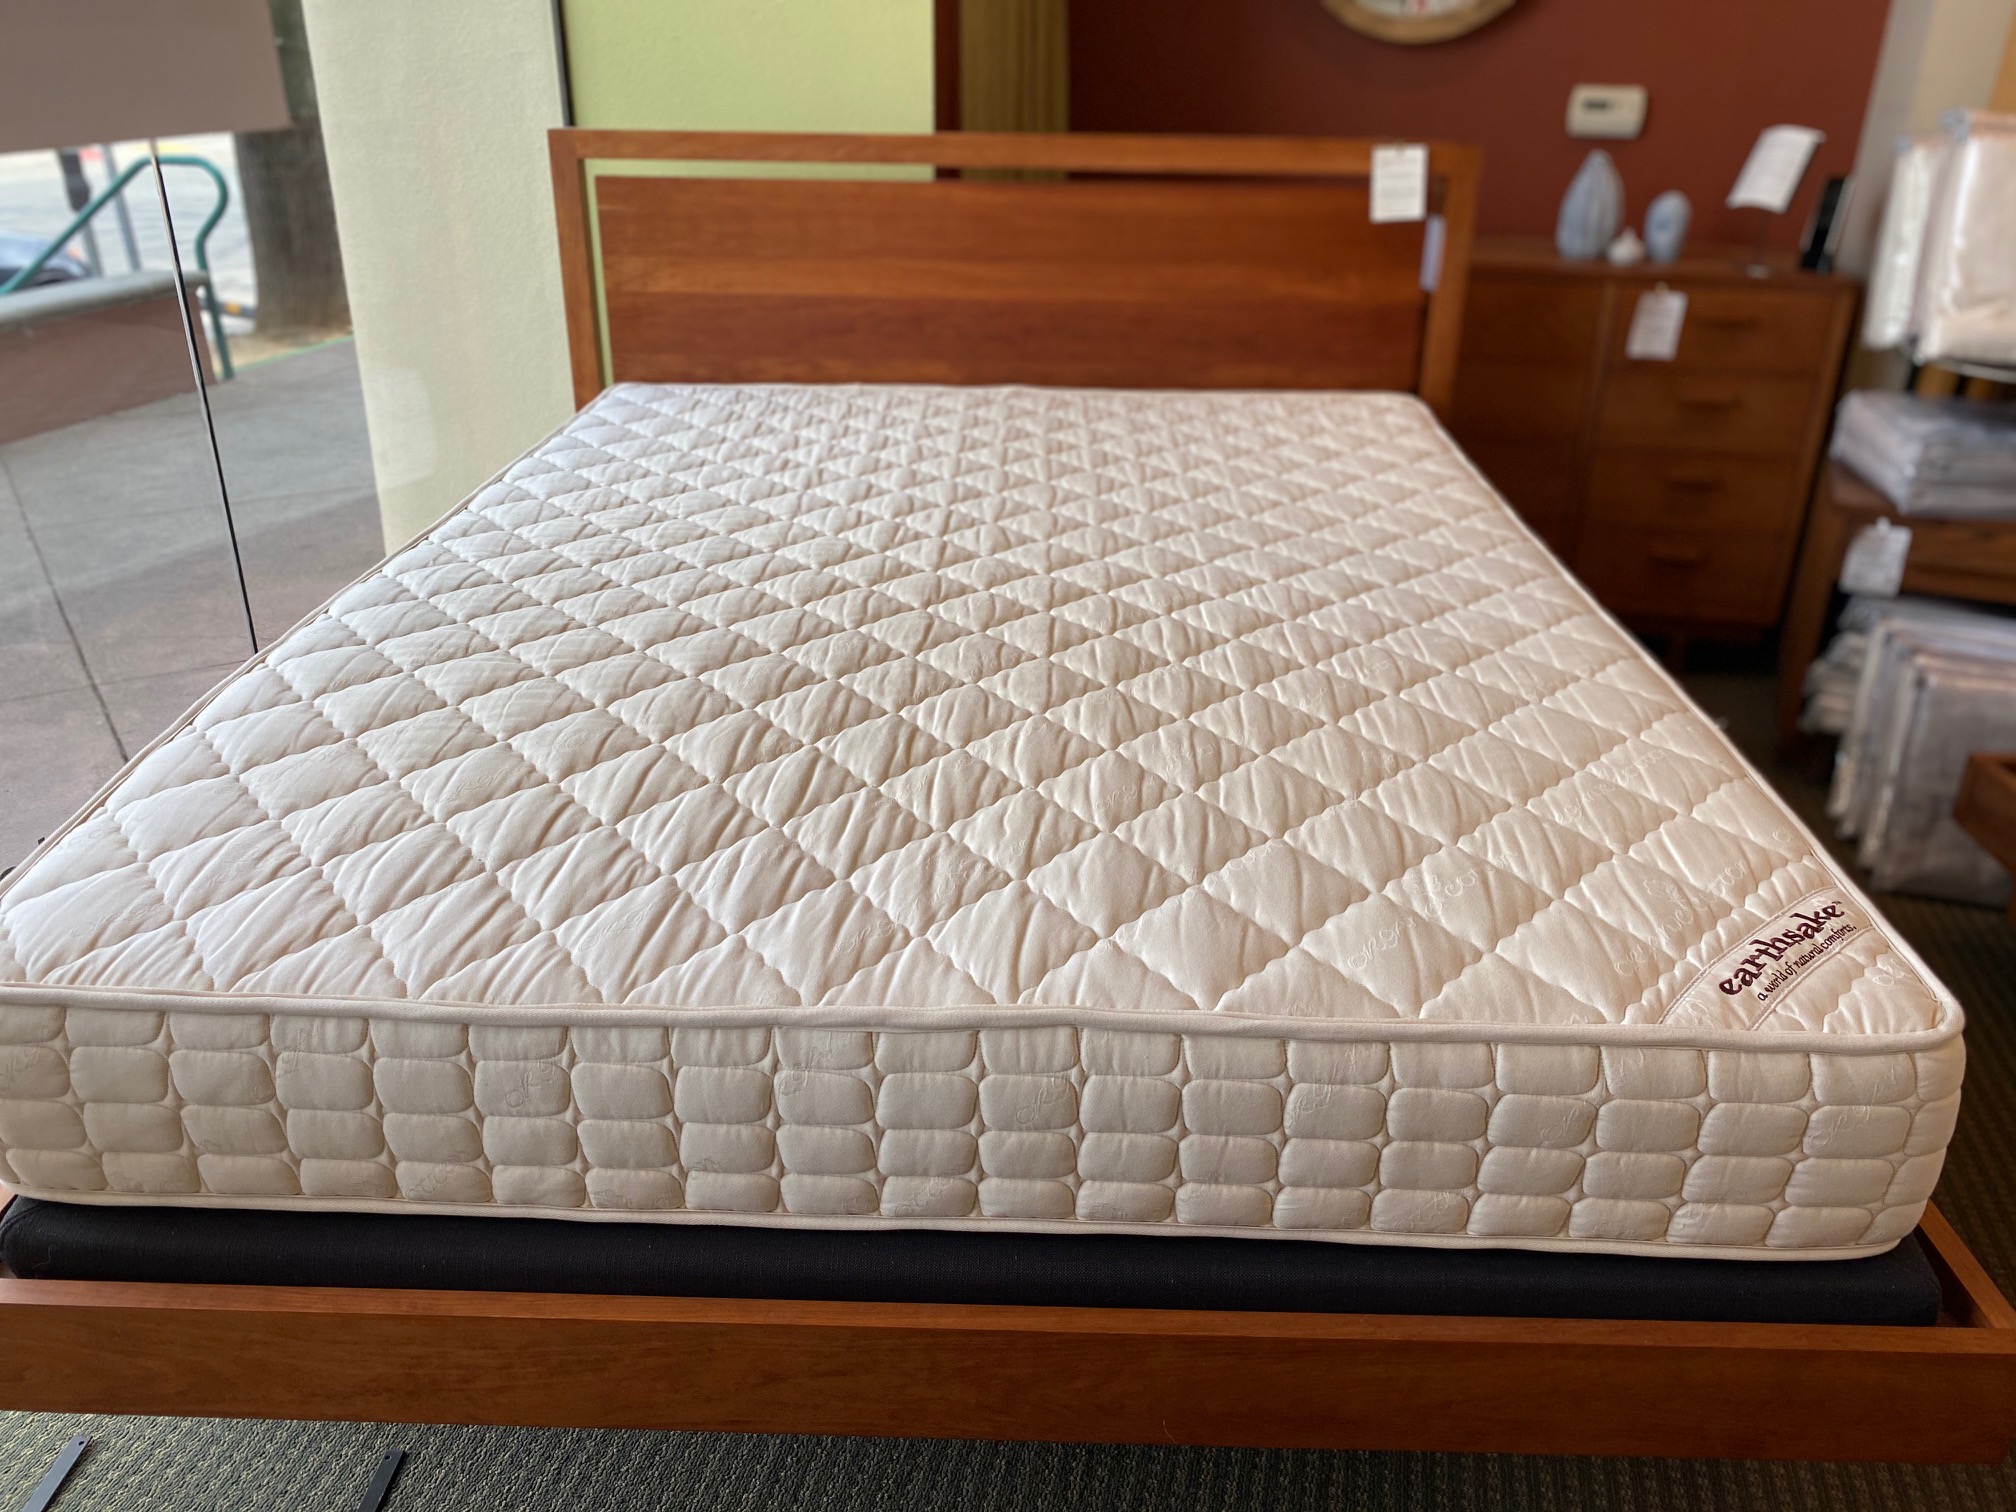 The earthSake Organic Mattress - Quilted Cover (can be ordered in several custom options)